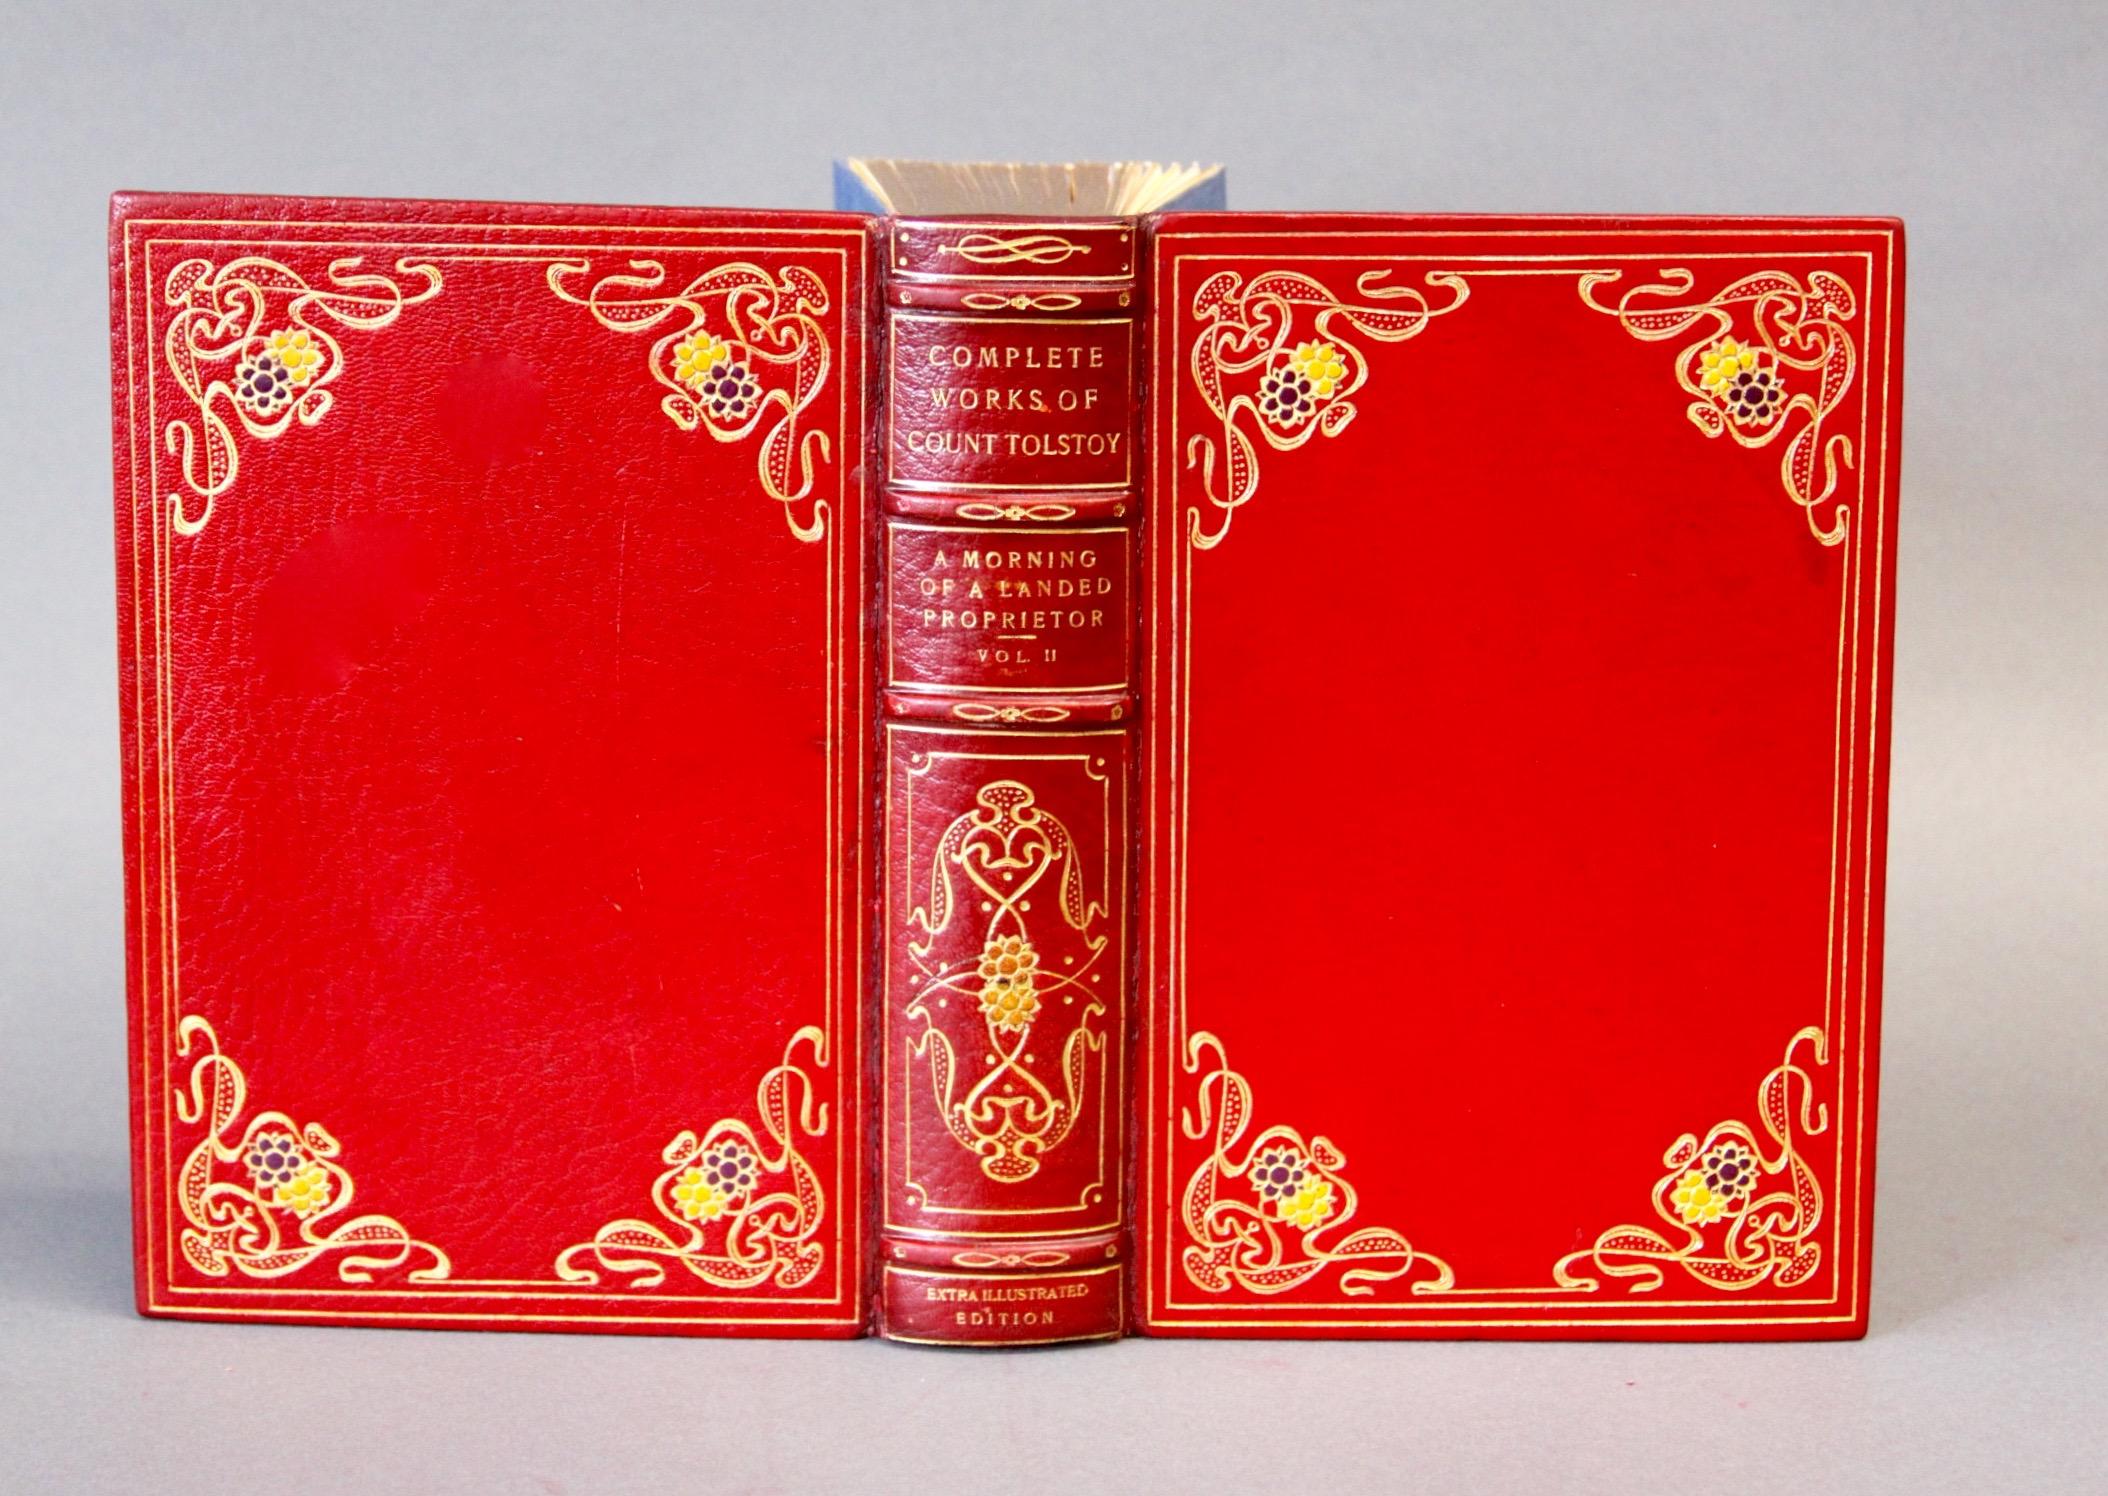 Antique books. Twenty-four volumes. Published: New York, The Chaucer Company, 1900s. The Complete Works of Count Leo Tolstoy. Extra illustrated edition, limited to twenty-five copies which this is number 7. Each volume to frontispiece with a hand